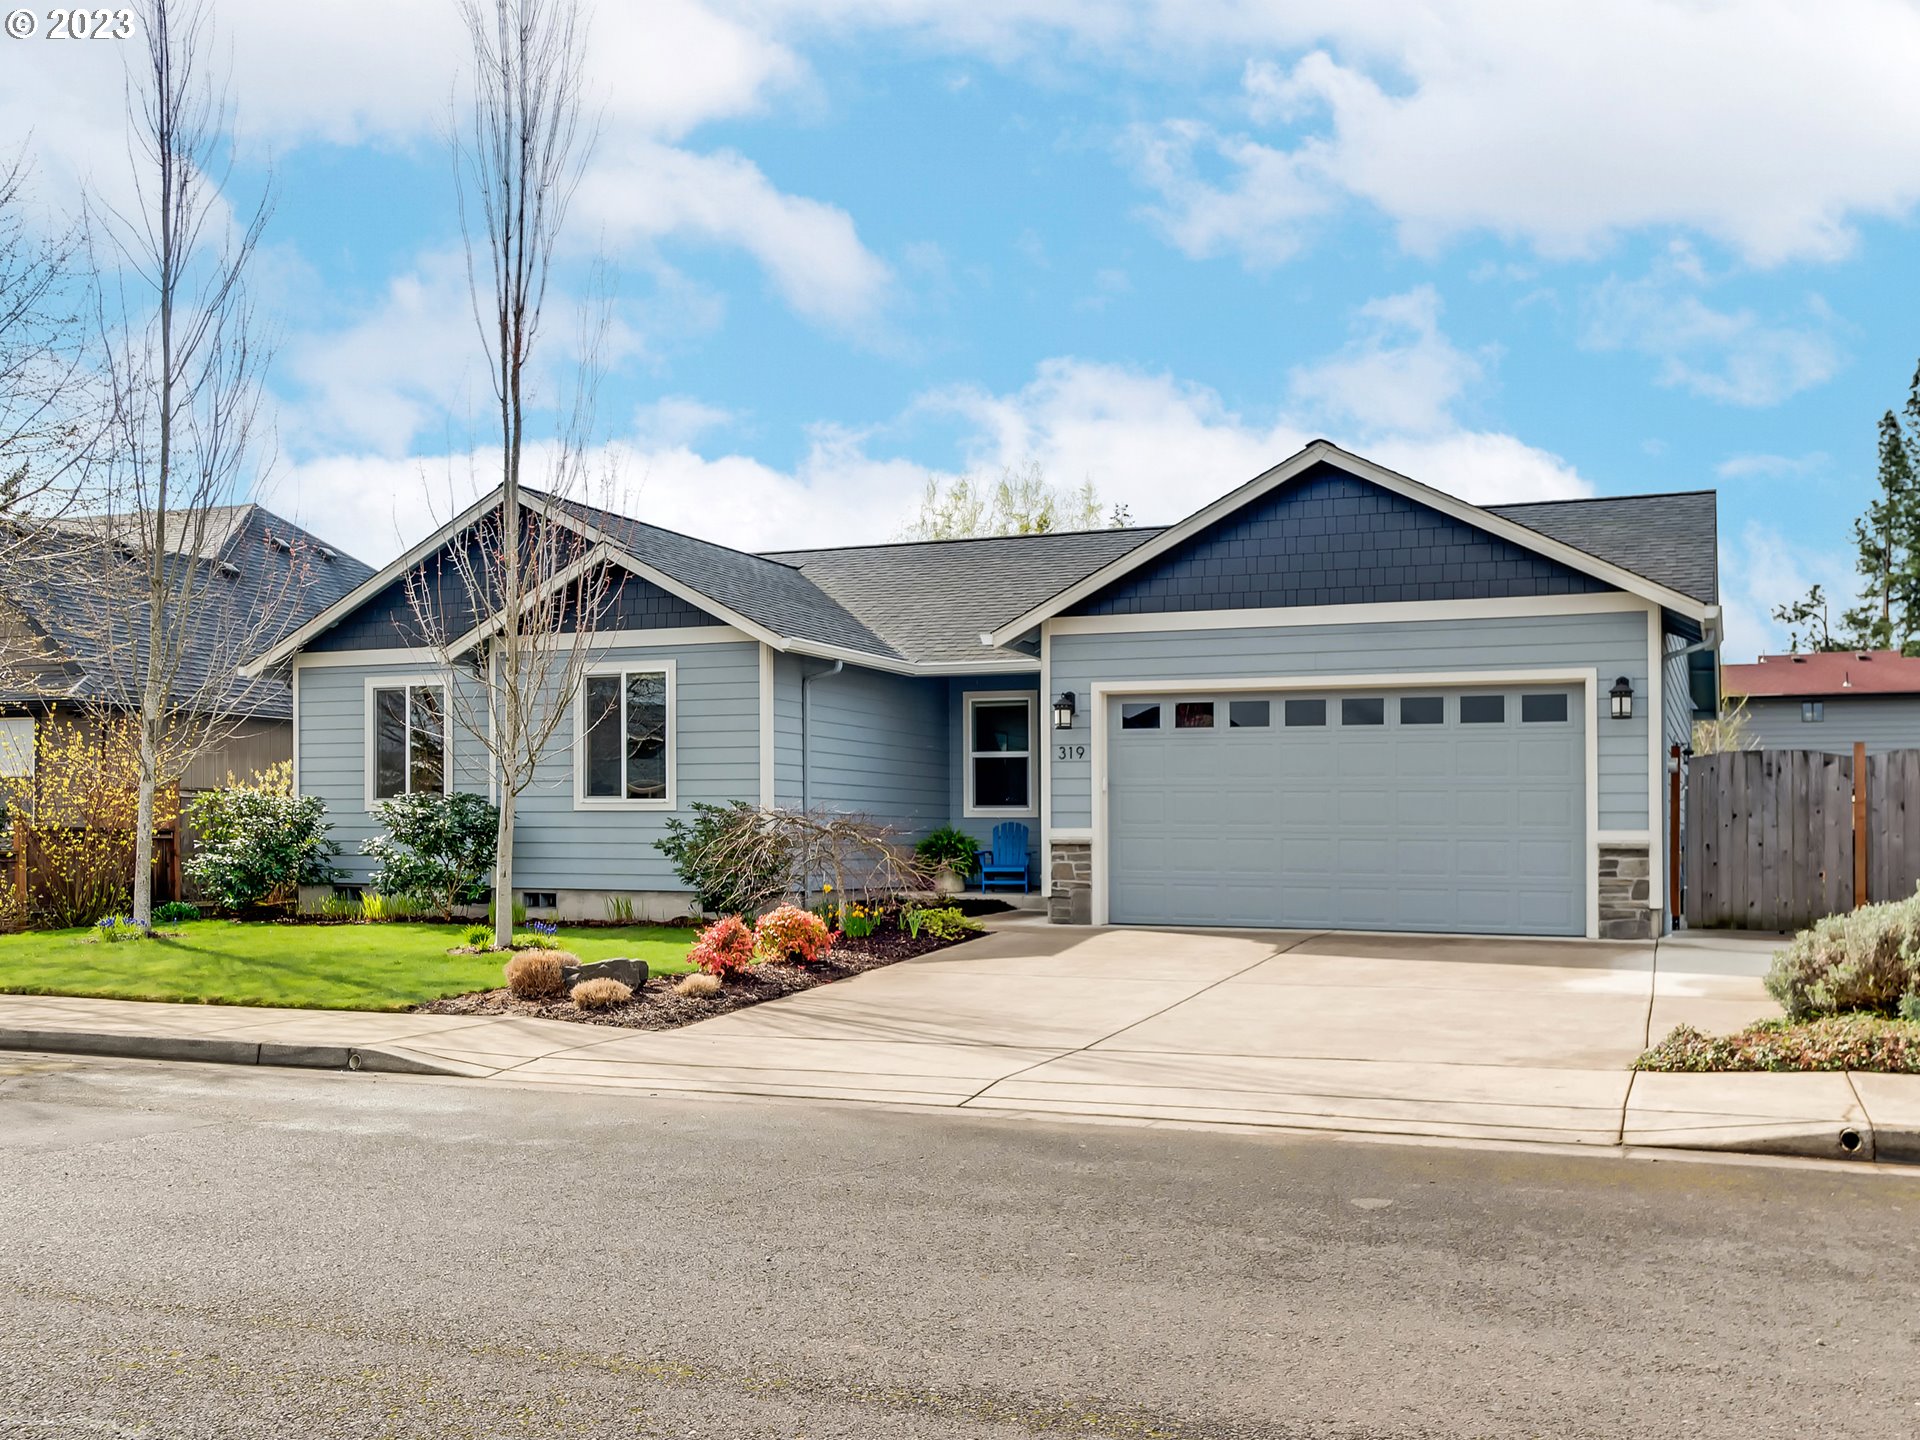 319 CAMRIN LOOP, Creswell, OR 97426